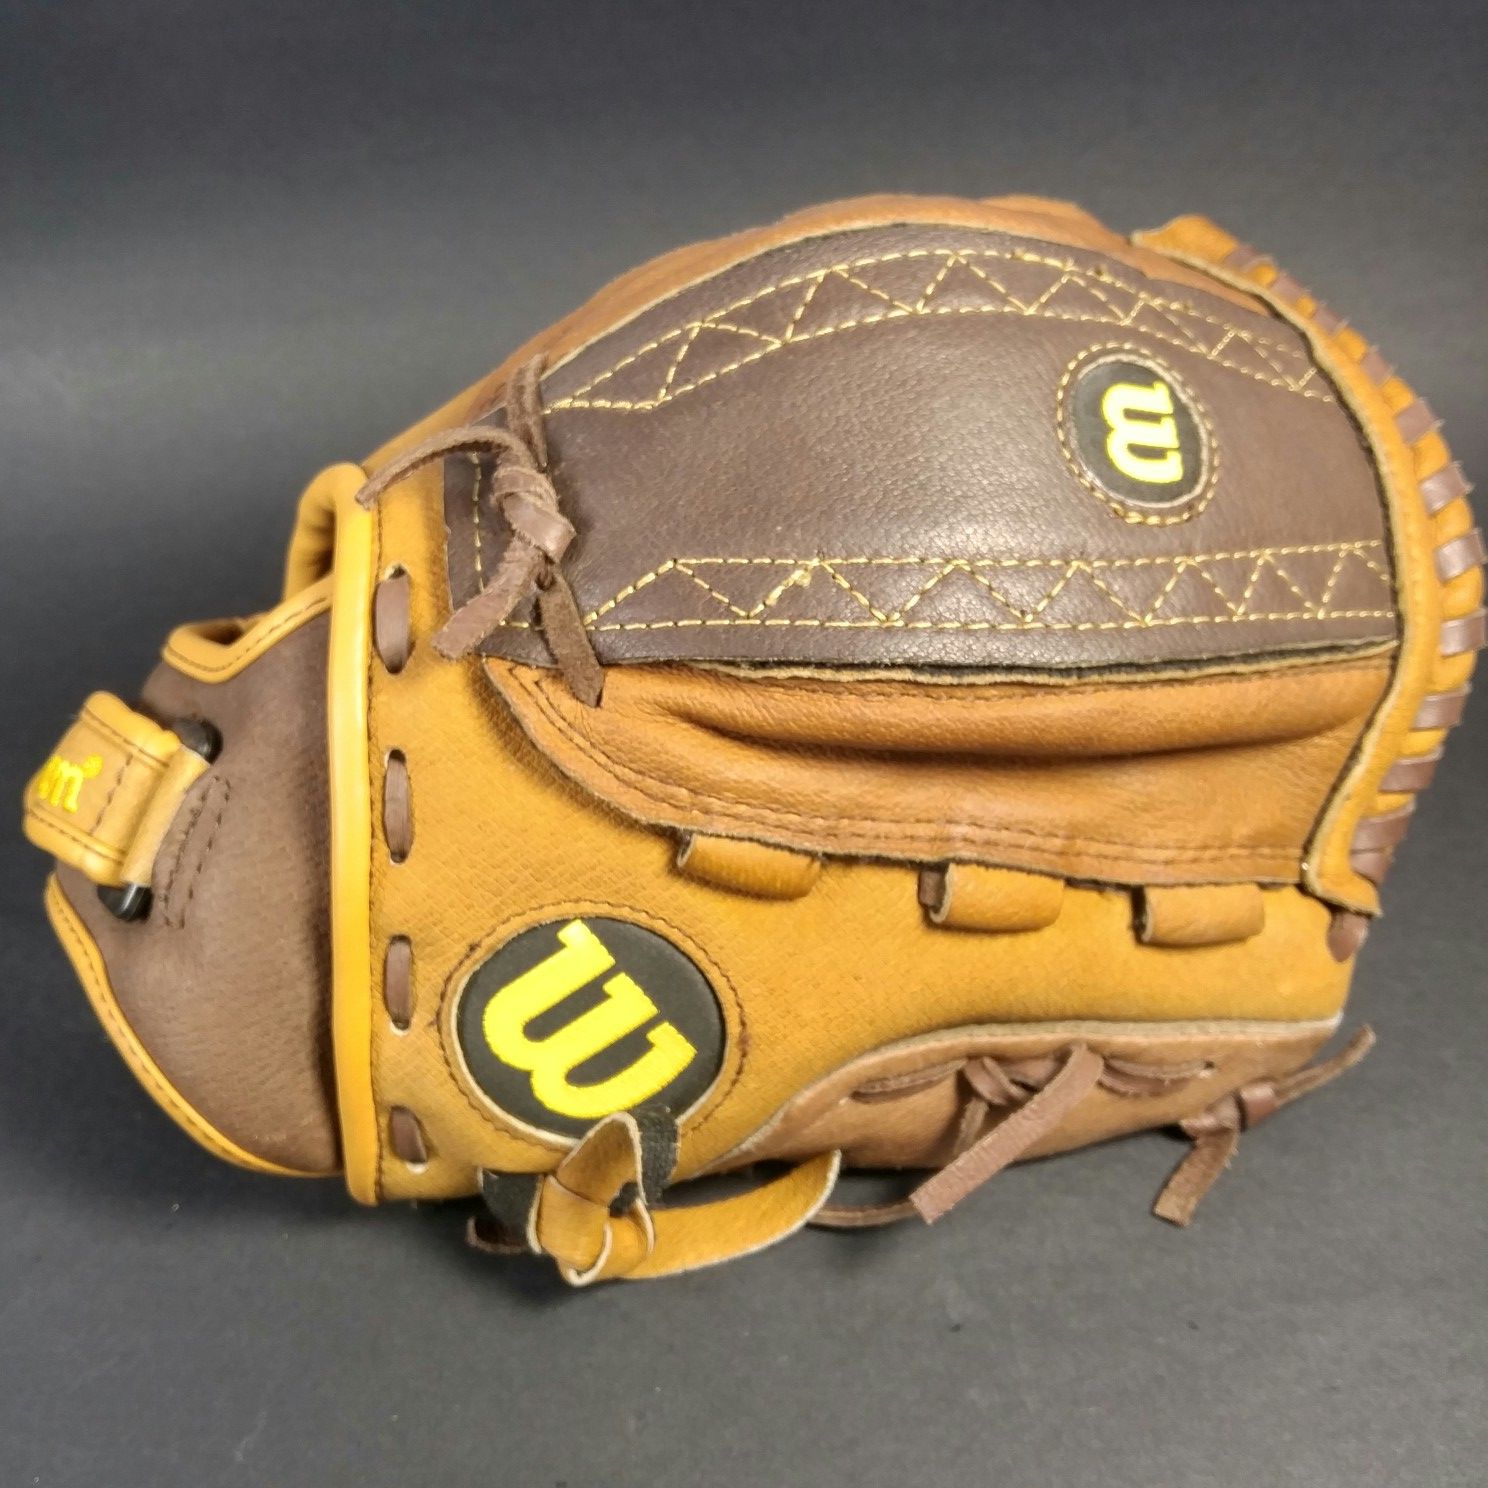 WILSON A044011-BR 11 1/2" SOFTBALL FASTPITCH GLOVE RH PLAYER(GOES ON LEFT HAND)